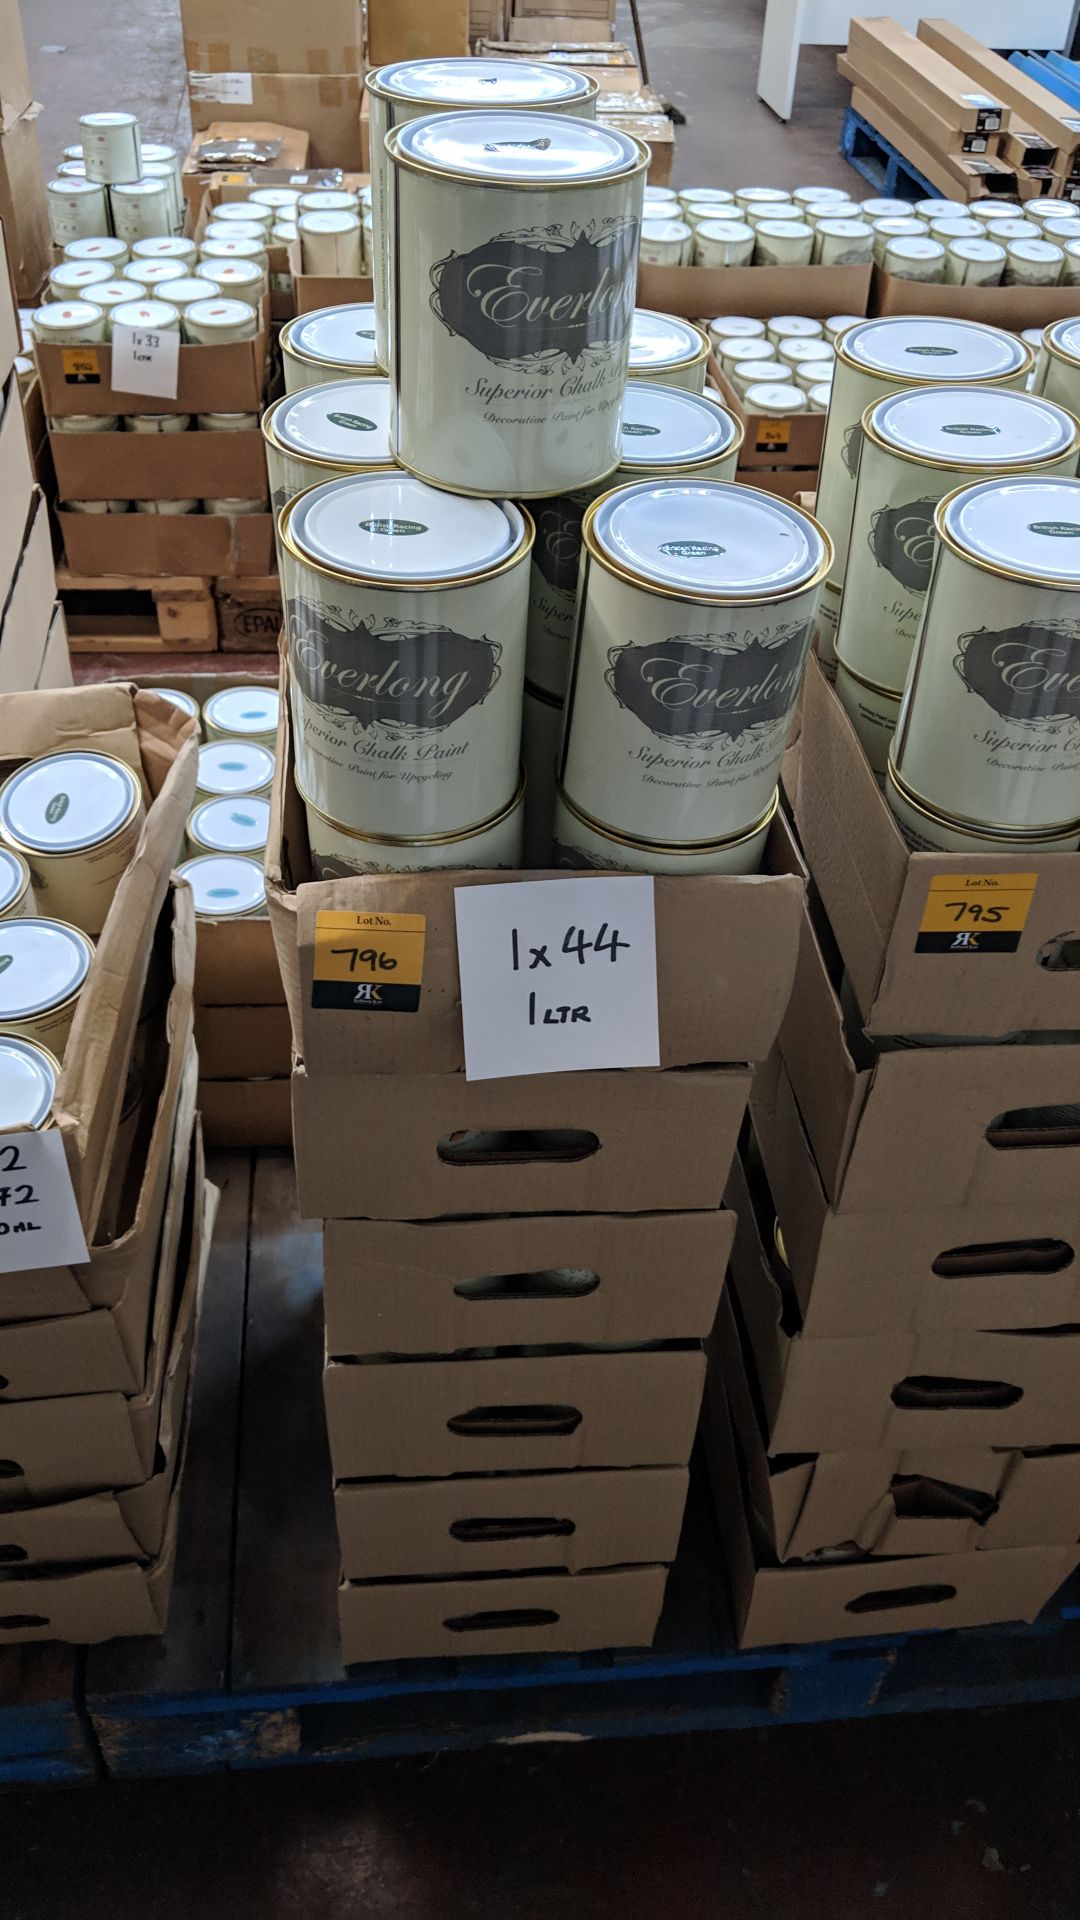 44 off 1 litre tins of Everlong branded superior chalk paint - colour British Racing Green This